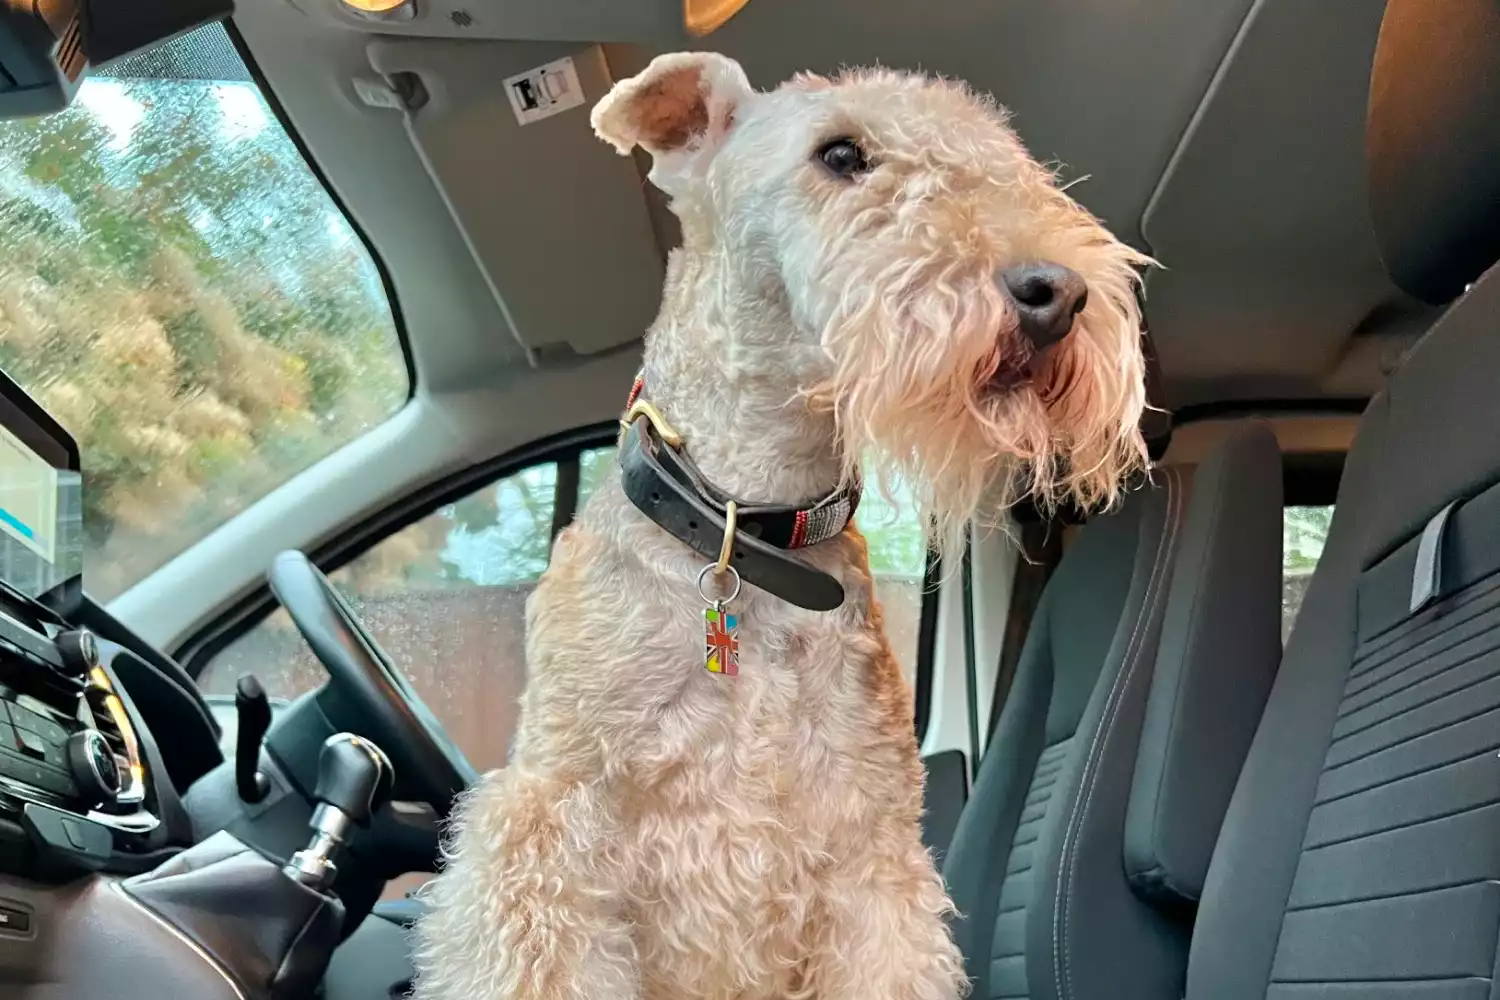 Ford EcoSport Dog Car Seat for Lakeland Terriers